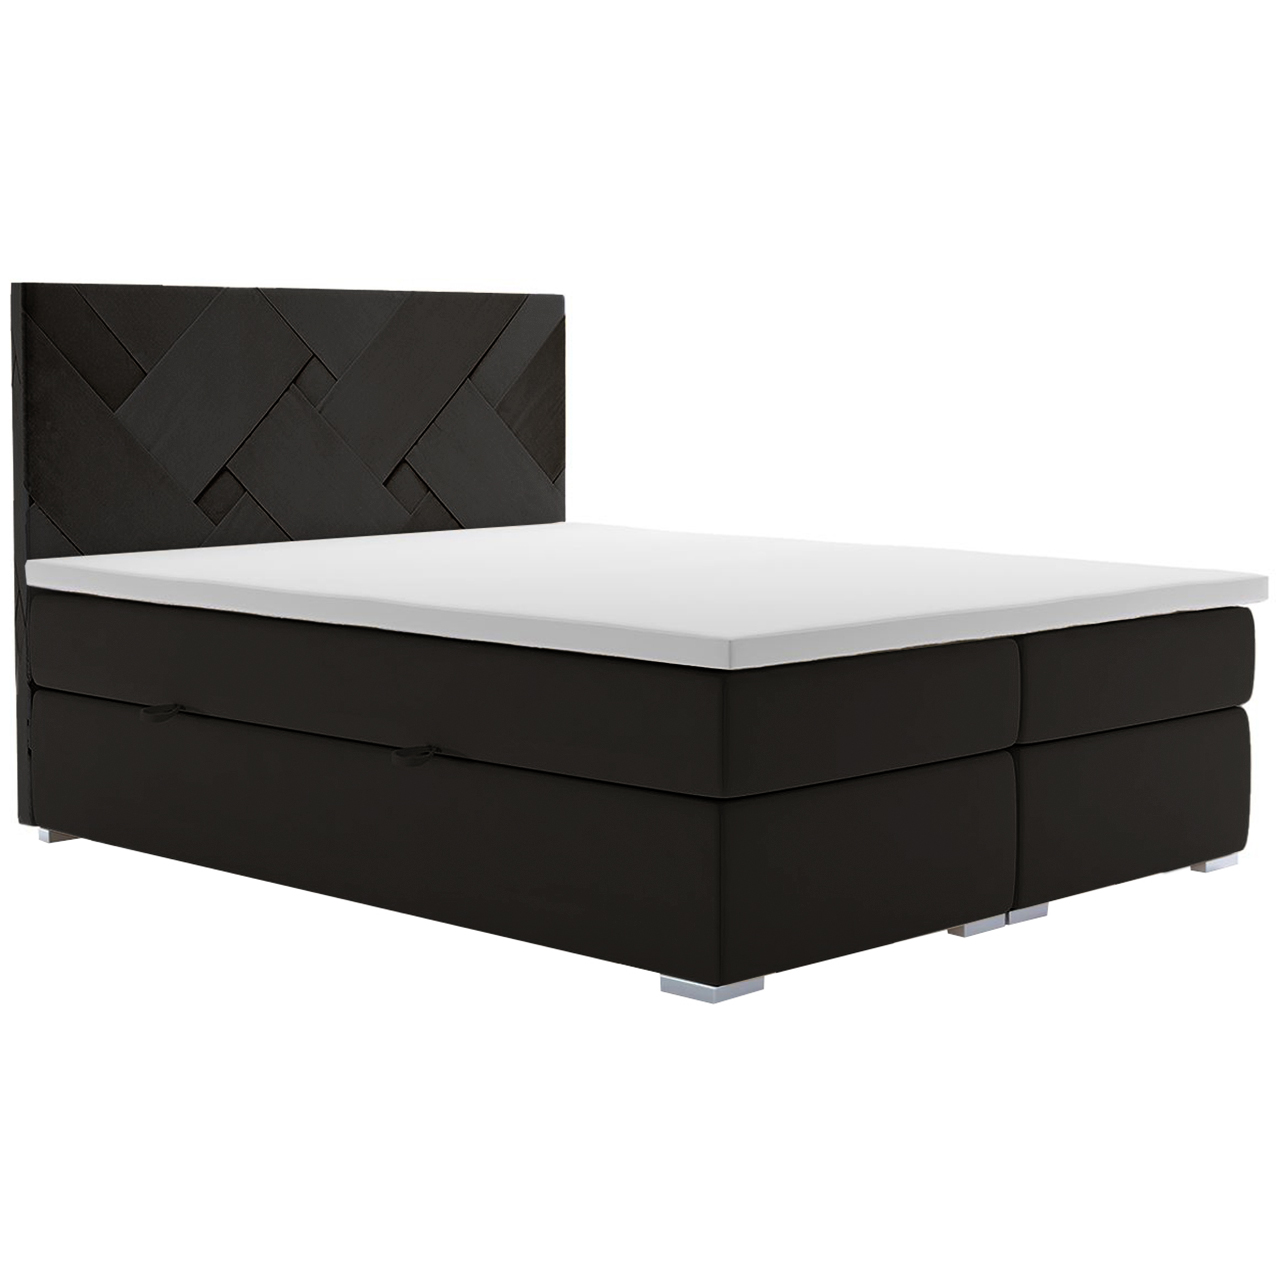 Upholstered bed BALIZO 180x200 riviera 100